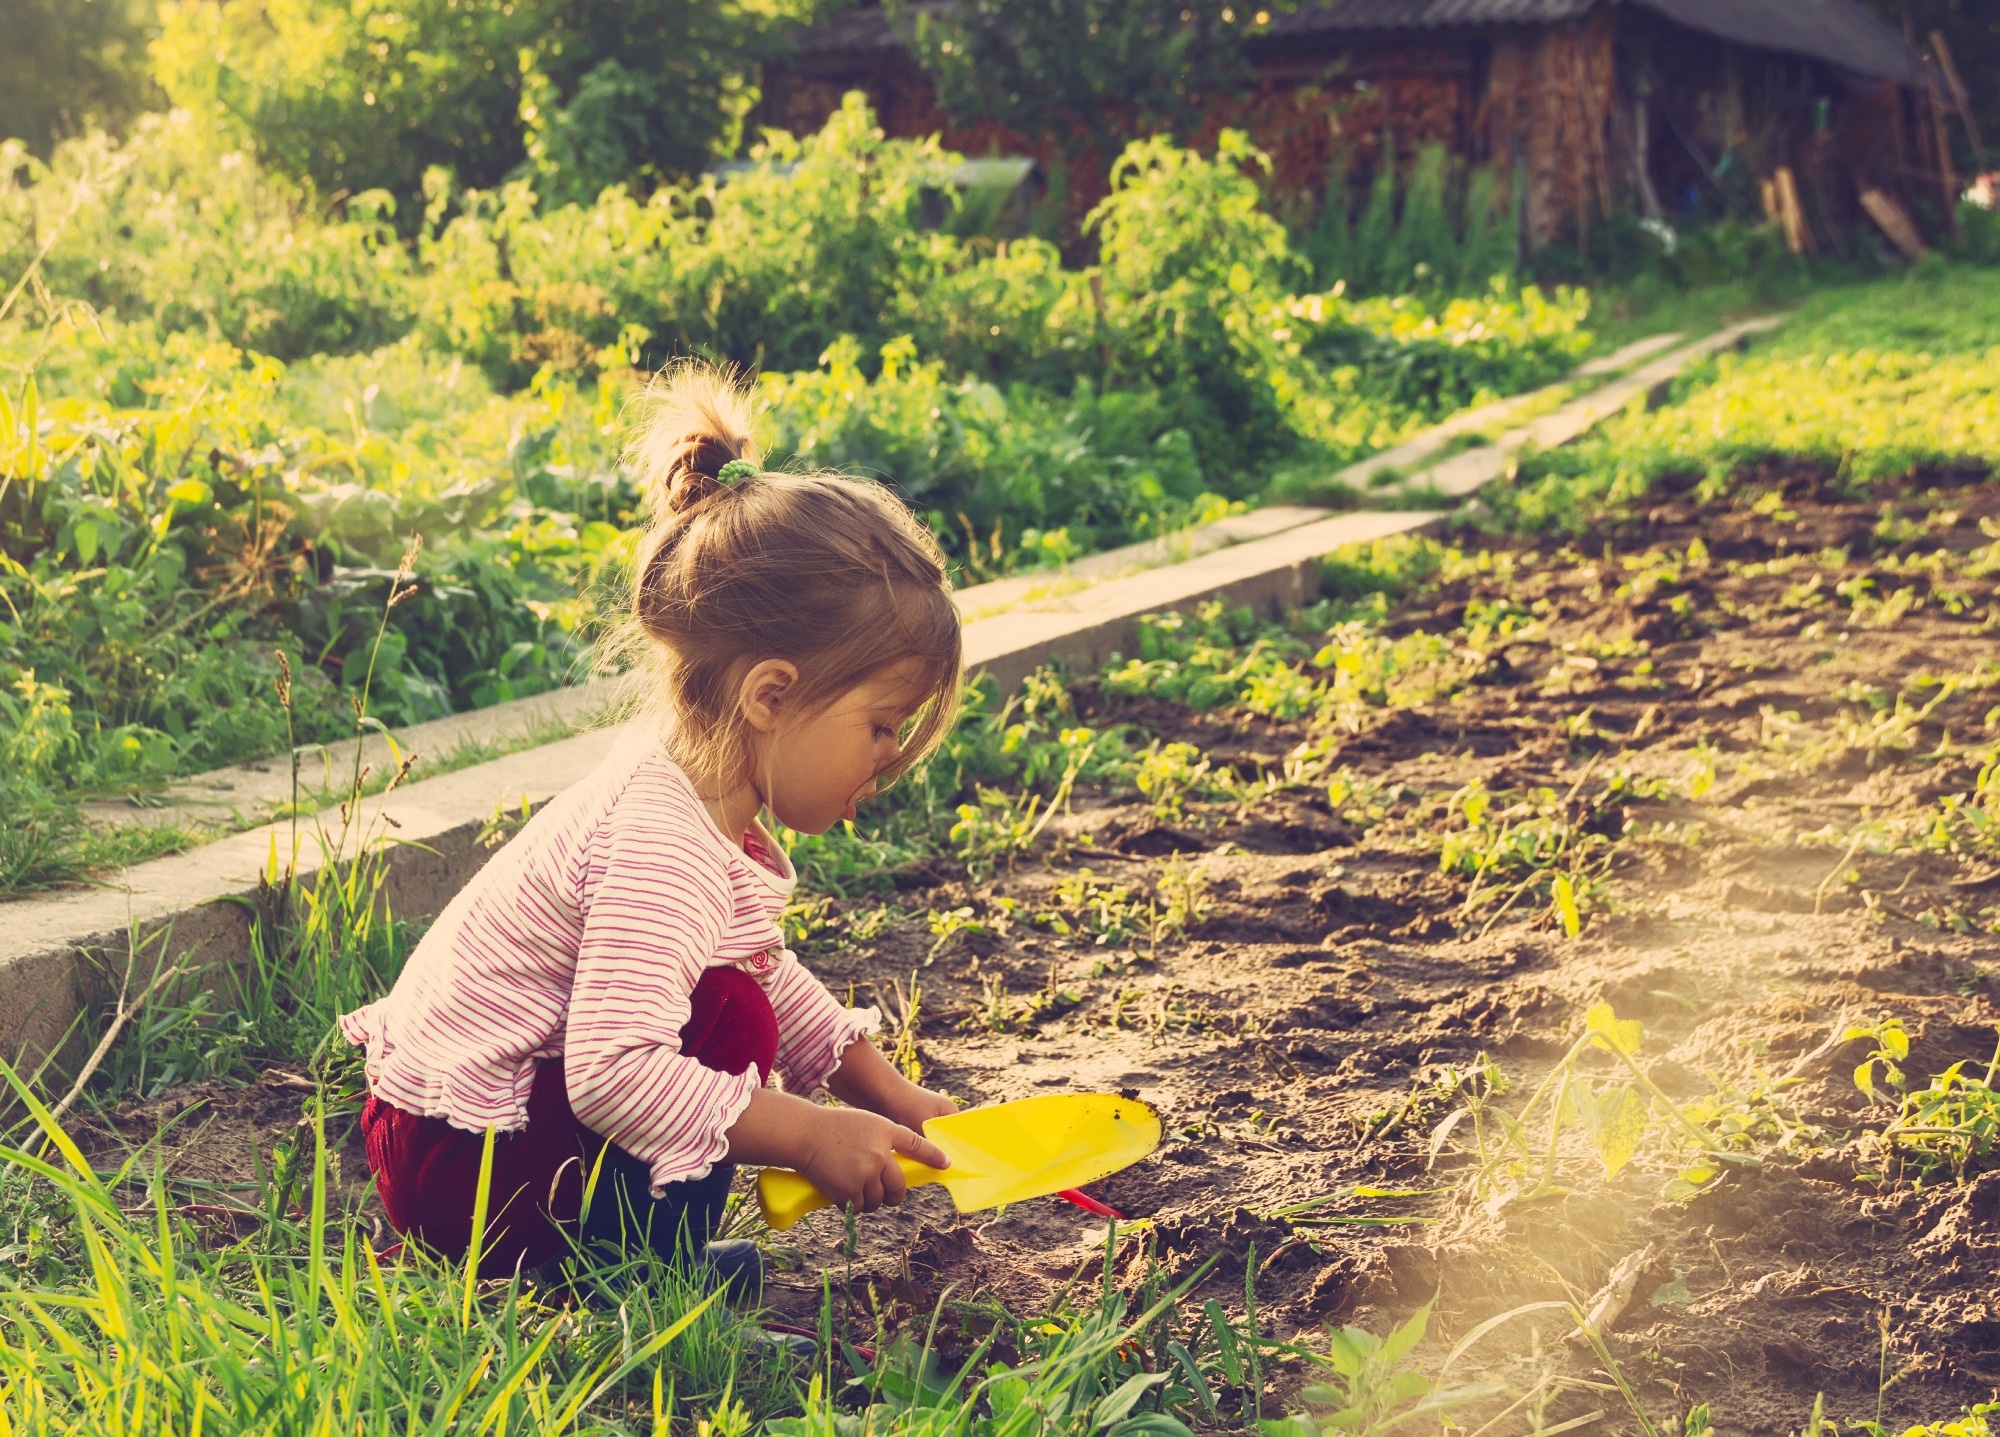 Study: Association between early life exposure to agriculture, biodiversity, and green space and risk of inflammatory bowel disease: a population-based cohort study. Image Credit: Katya Shut/Shutterstock.com